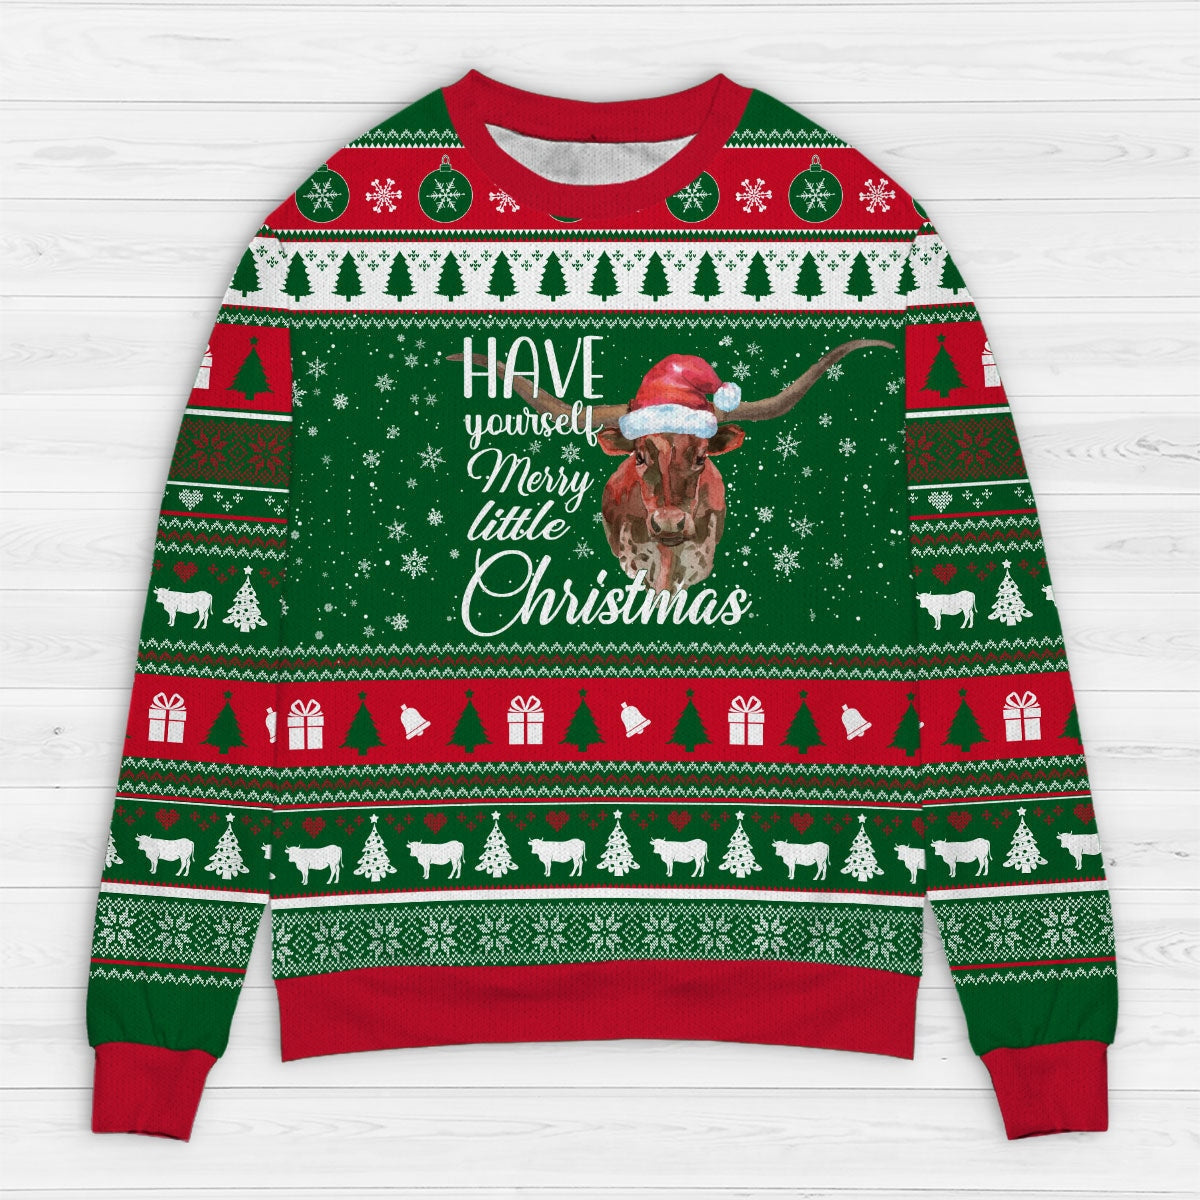 Texas Longhorn Ugly Christmas Sweater Have Yourself Merry Little Christmas, Perfect Outfit For Christmas, New Year Of Texas Longhorn Lovers